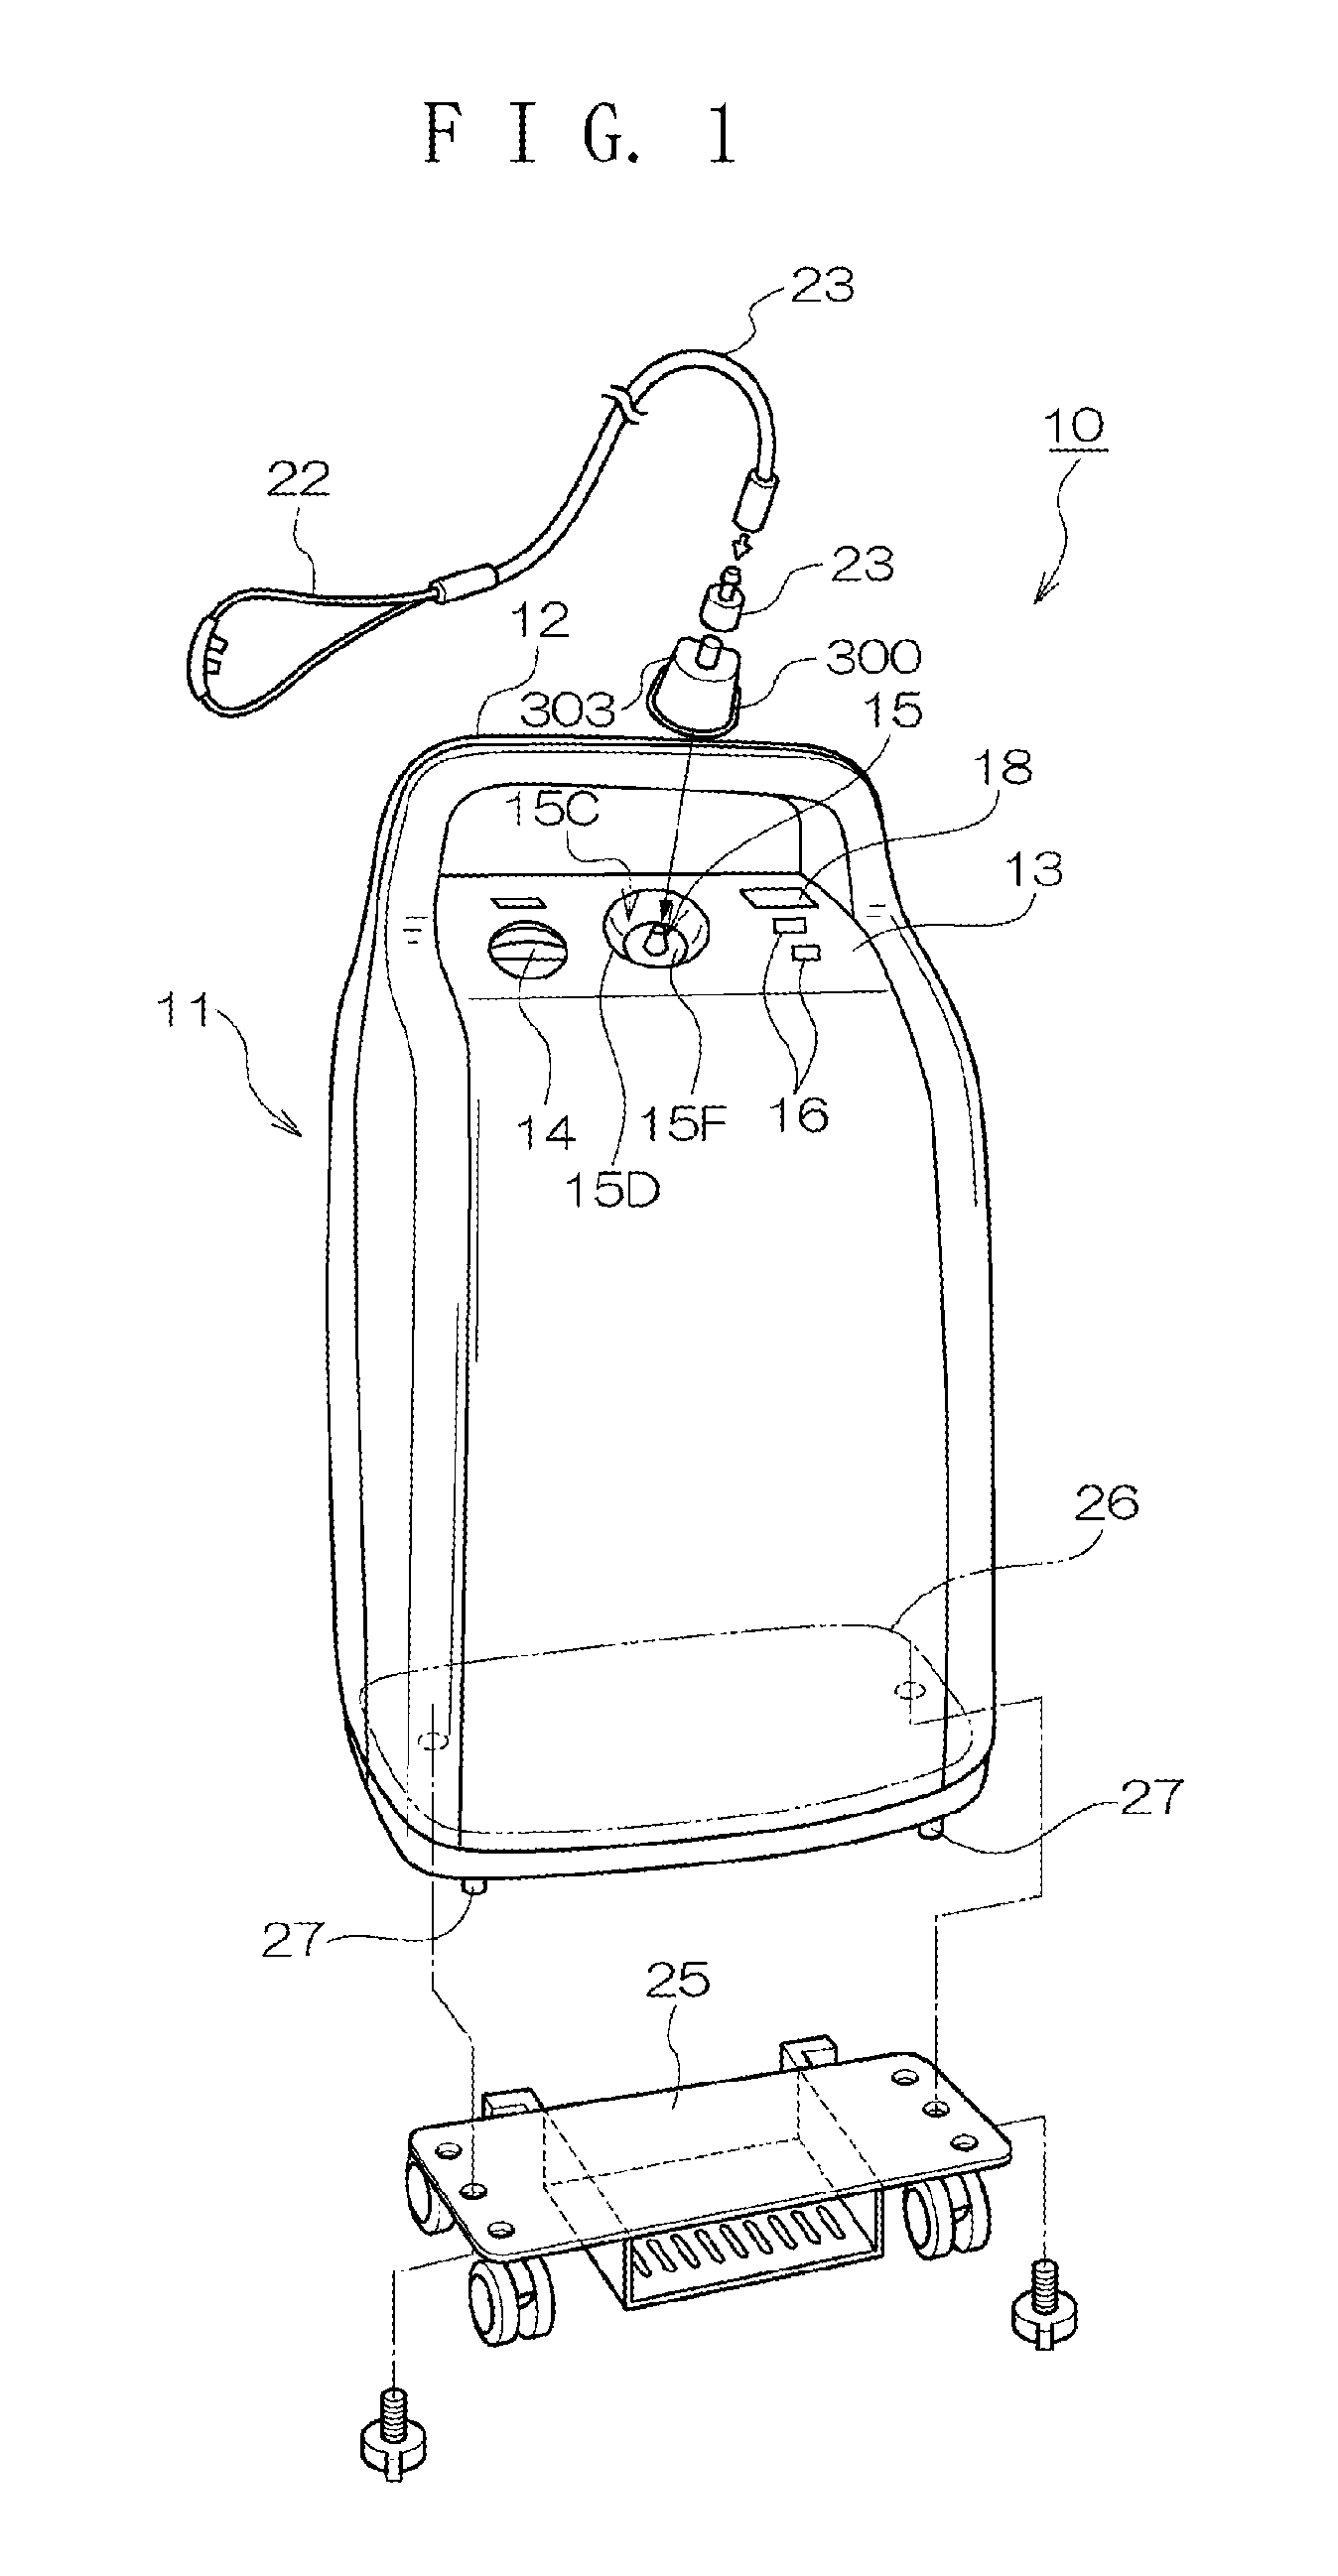 Overheating detection unit and oxygen concentrator